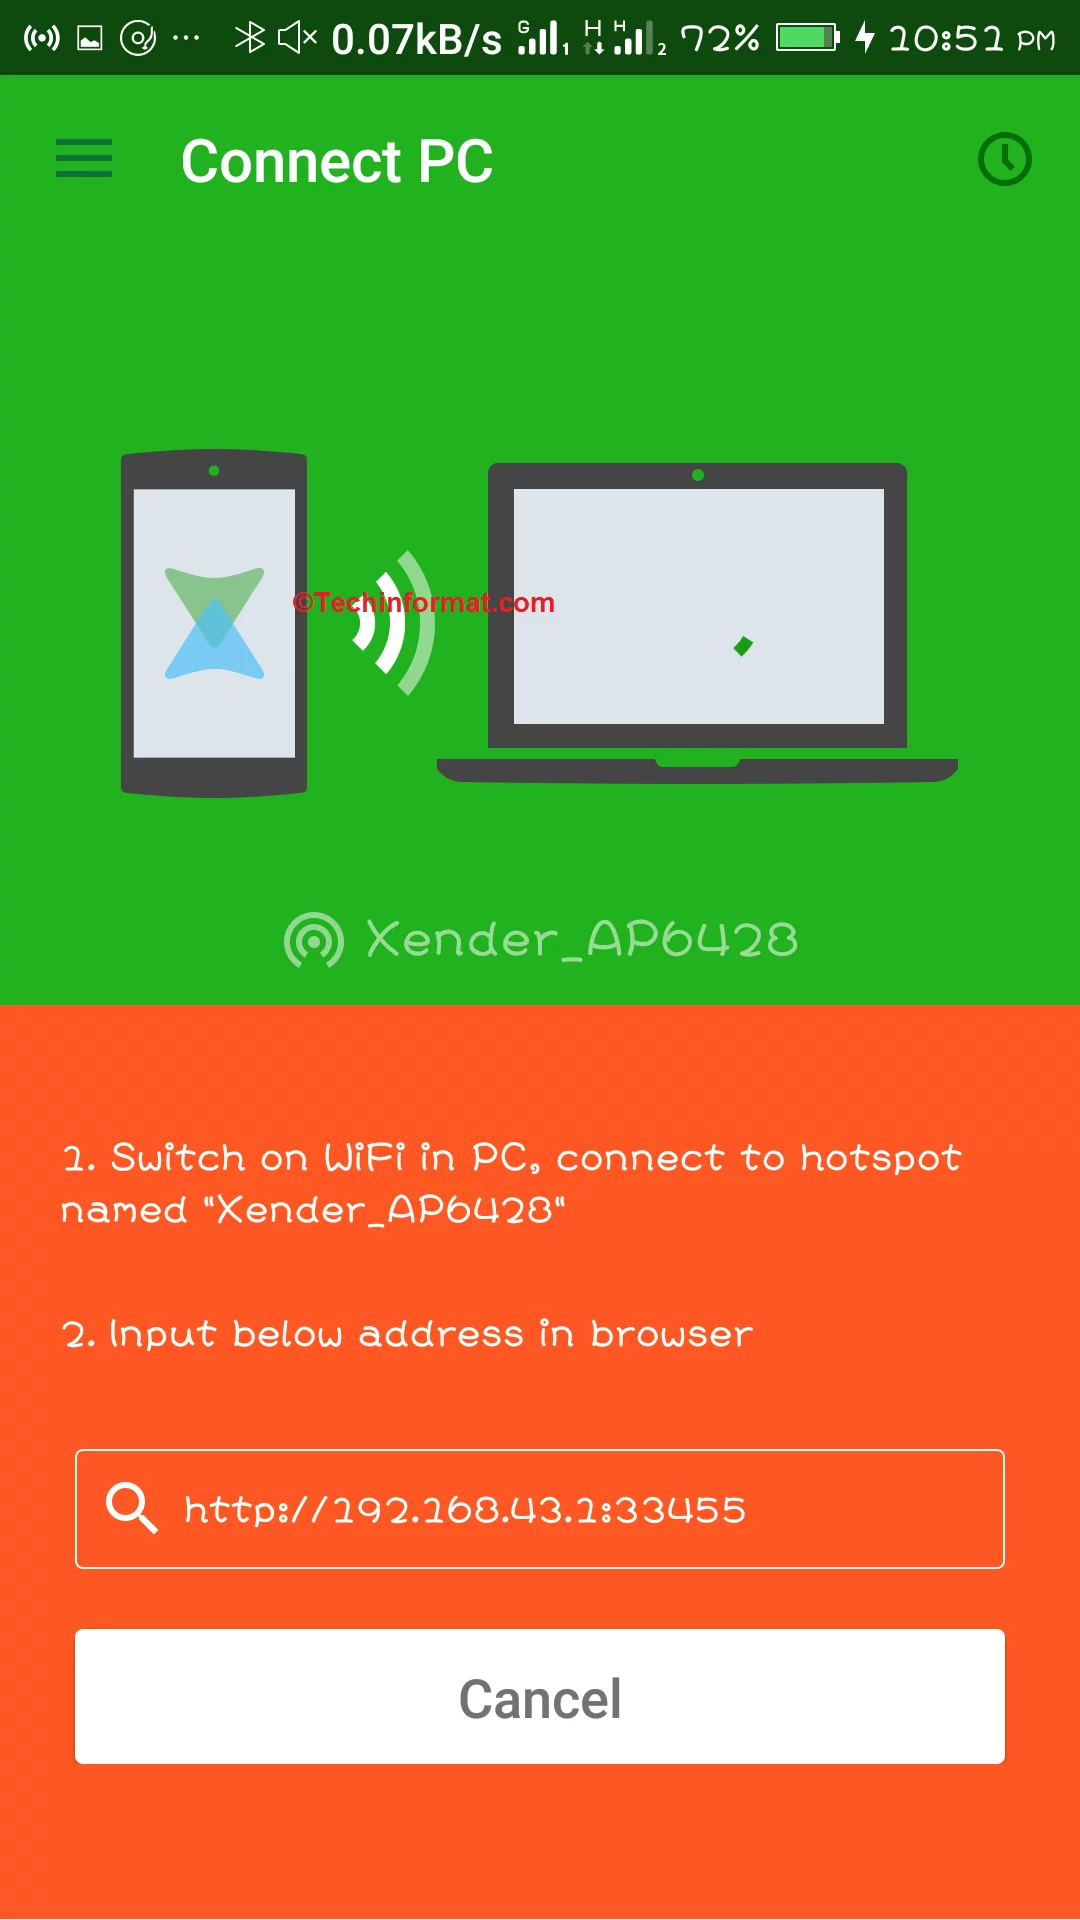 xender connect PC